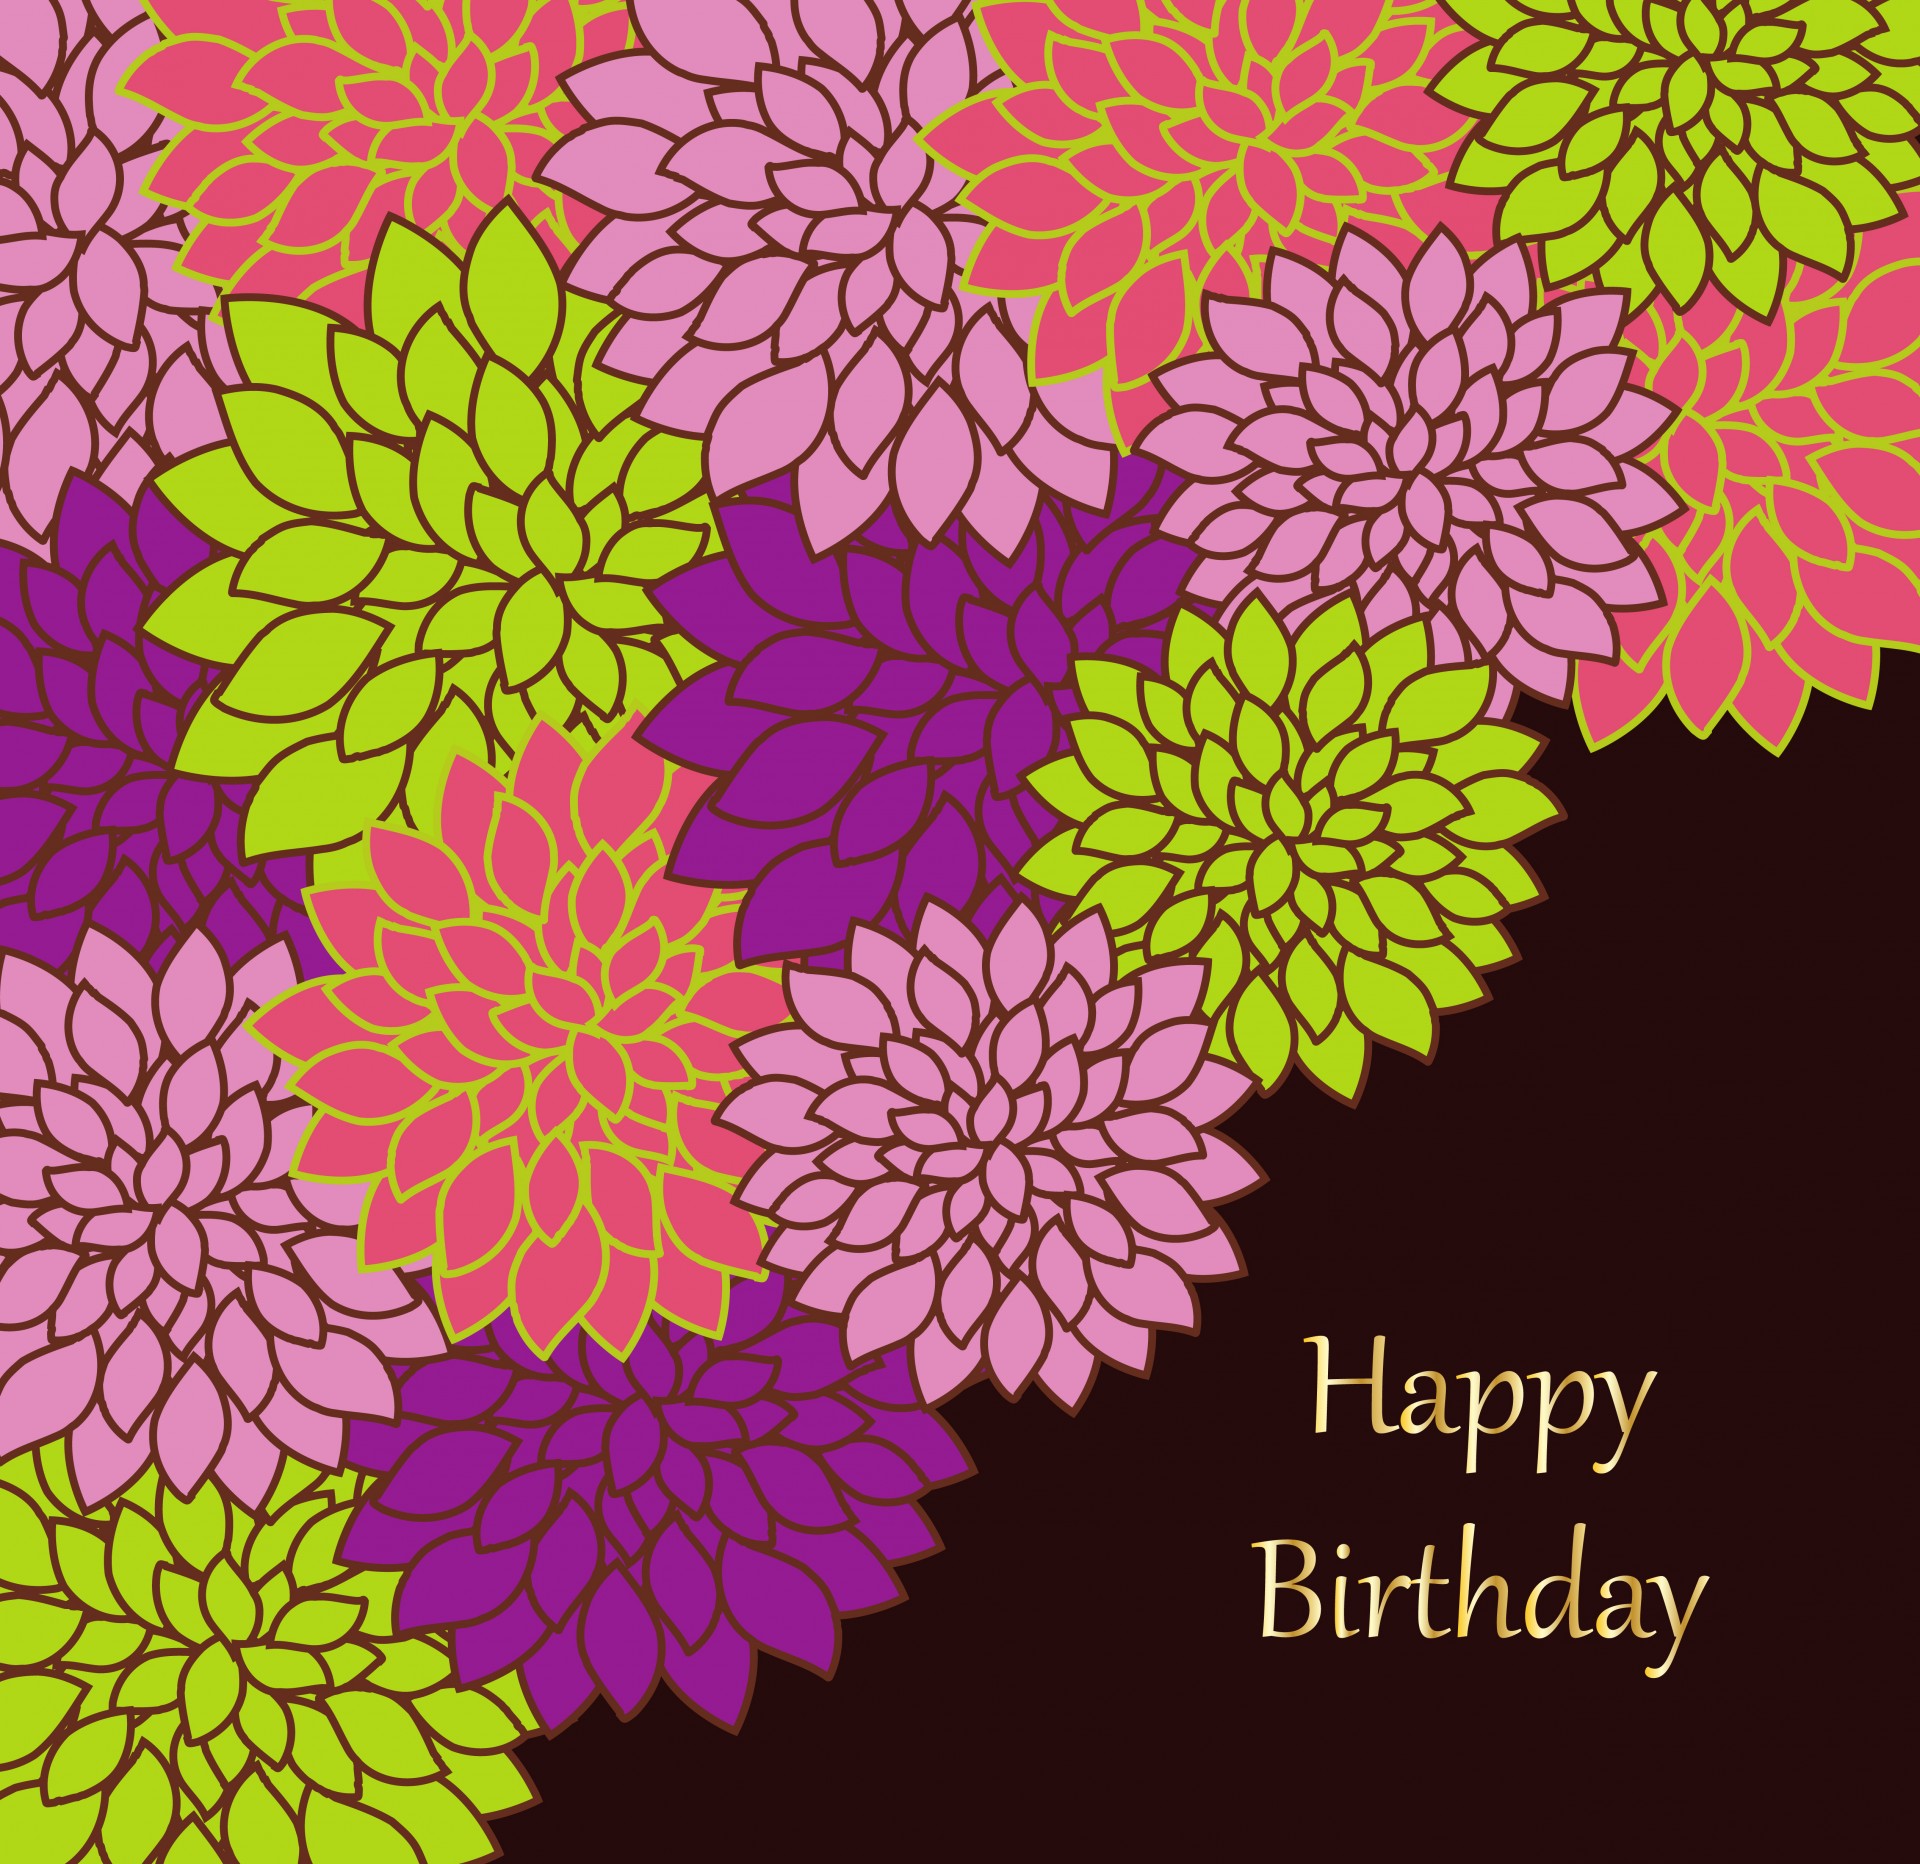 birthday-card-card-birthday-floral-flowers-free-image-from-needpix